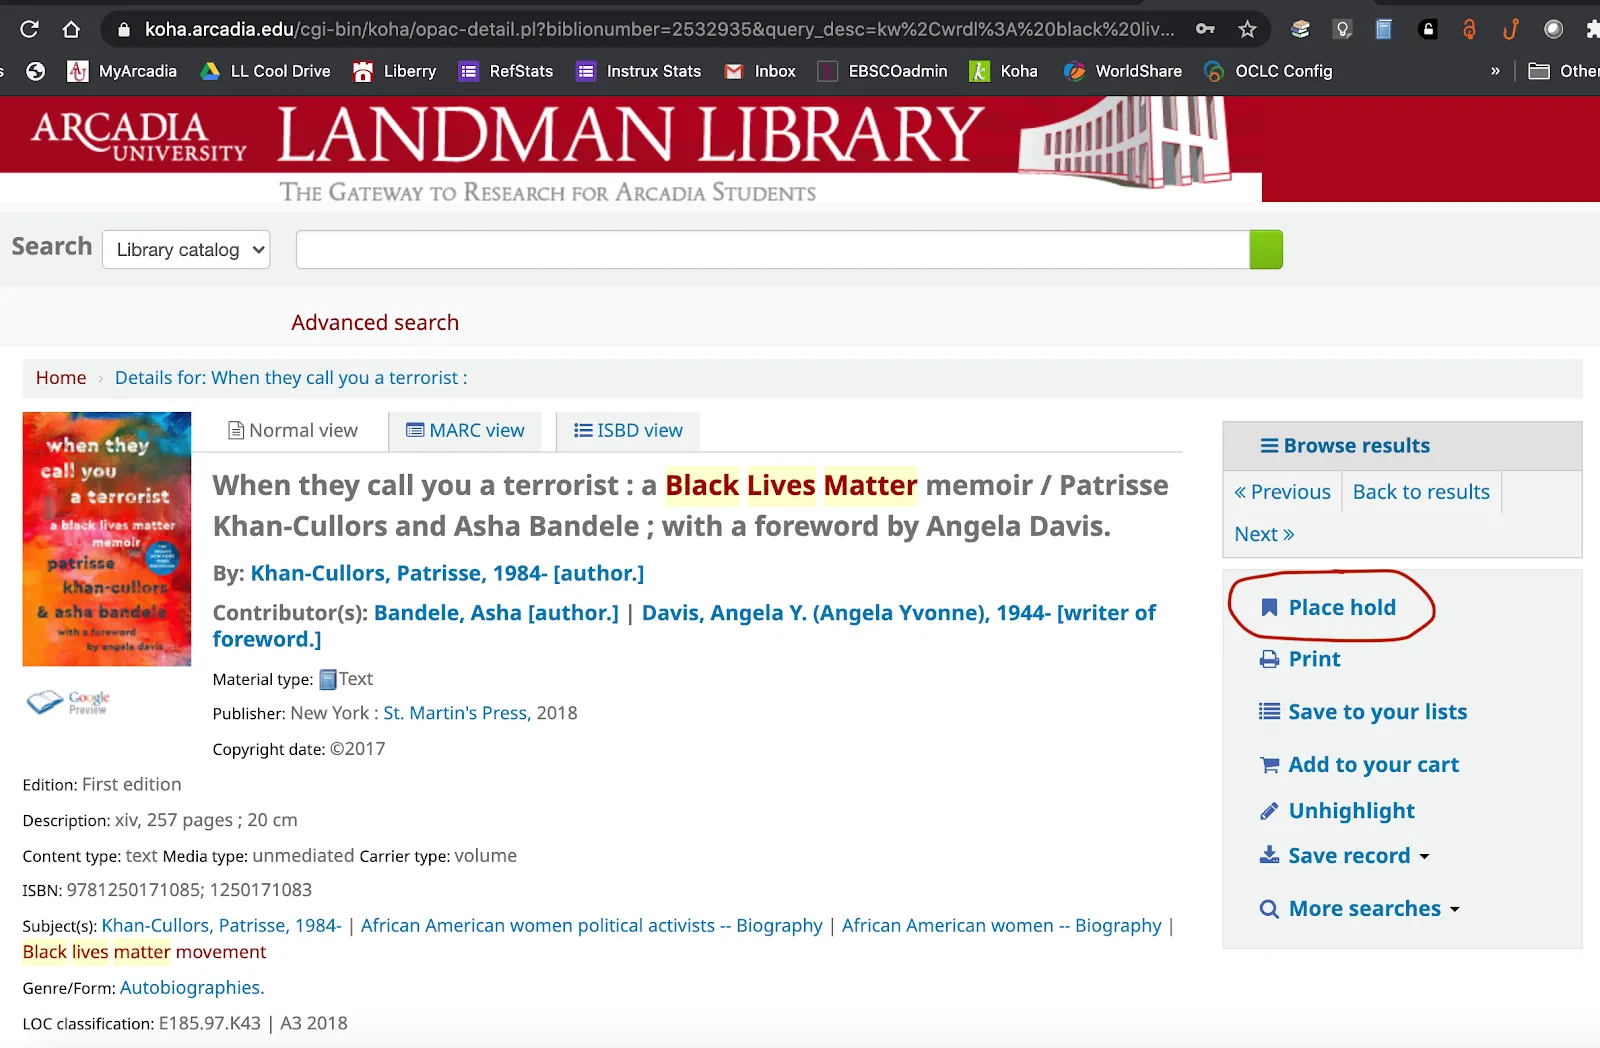 Screenshot of how to place hold for a library book, from the sidebar at the right side of the screen.